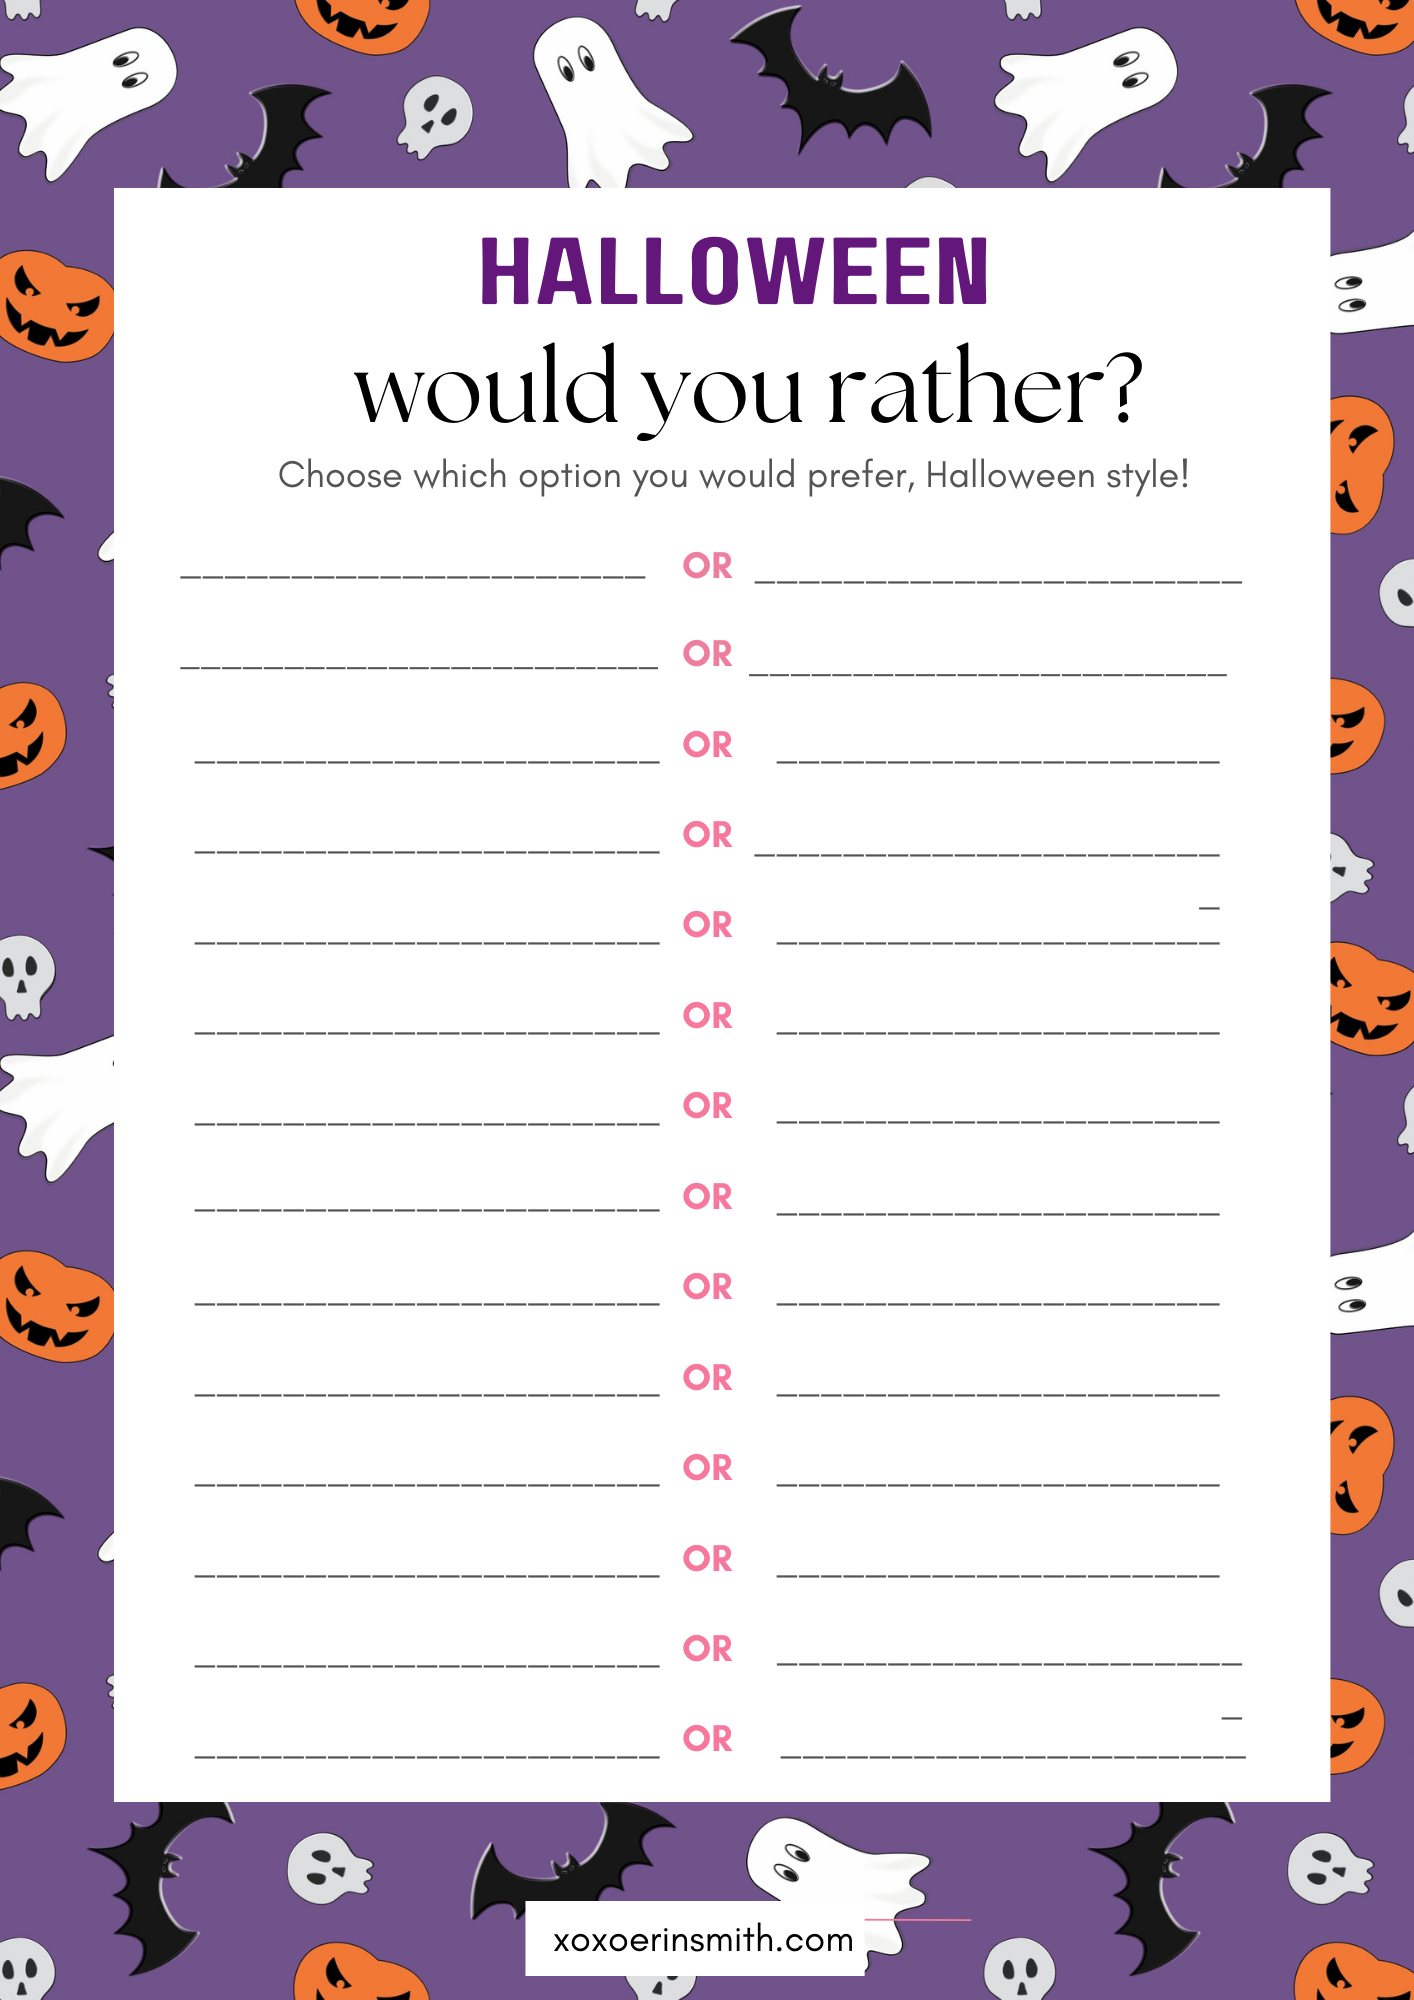 Fall Themed Would You Rather Questions for Kids